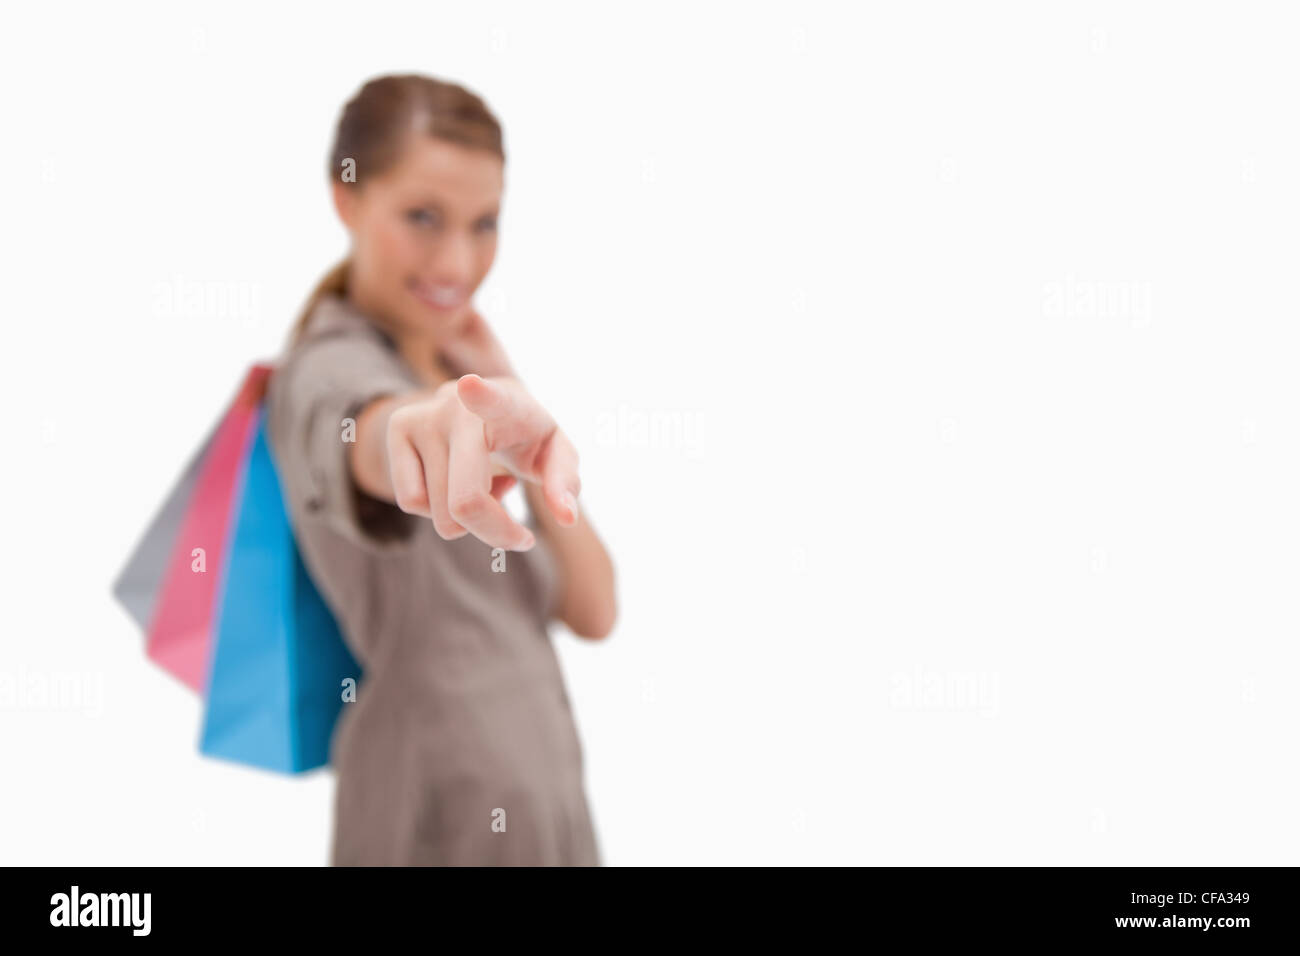 Hand of woman with shopping bags pointing Stock Photo